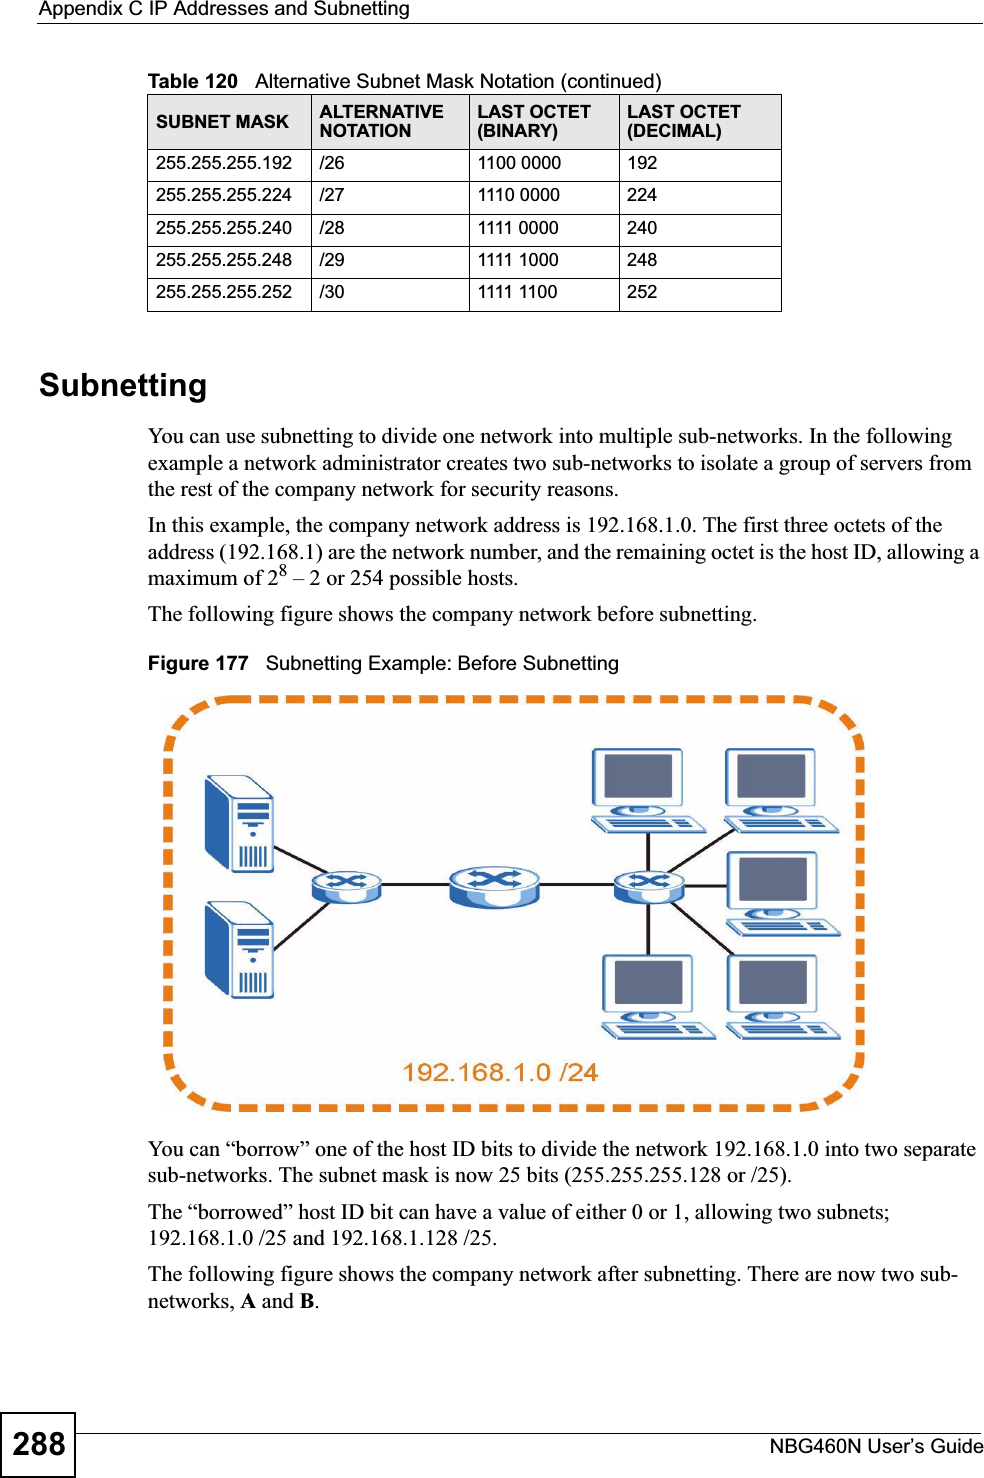 Appendix C IP Addresses and SubnettingNBG460N User’s Guide288SubnettingYou can use subnetting to divide one network into multiple sub-networks. In the following example a network administrator creates two sub-networks to isolate a group of servers from the rest of the company network for security reasons.In this example, the company network address is 192.168.1.0. The first three octets of the address (192.168.1) are the network number, and the remaining octet is the host ID, allowing a maximum of 28 – 2 or 254 possible hosts.The following figure shows the company network before subnetting.  Figure 177   Subnetting Example: Before SubnettingYou can “borrow” one of the host ID bits to divide the network 192.168.1.0 into two separate sub-networks. The subnet mask is now 25 bits (255.255.255.128 or /25).The “borrowed” host ID bit can have a value of either 0 or 1, allowing two subnets; 192.168.1.0 /25 and 192.168.1.128 /25. The following figure shows the company network after subnetting. There are now two sub-networks, A and B.255.255.255.192 /26 1100 0000 192255.255.255.224 /27 1110 0000 224255.255.255.240 /28 1111 0000 240255.255.255.248 /29 1111 1000 248255.255.255.252 /30 1111 1100 252Table 120   Alternative Subnet Mask Notation (continued)SUBNET MASK ALTERNATIVE NOTATIONLAST OCTET (BINARY)LAST OCTET (DECIMAL)